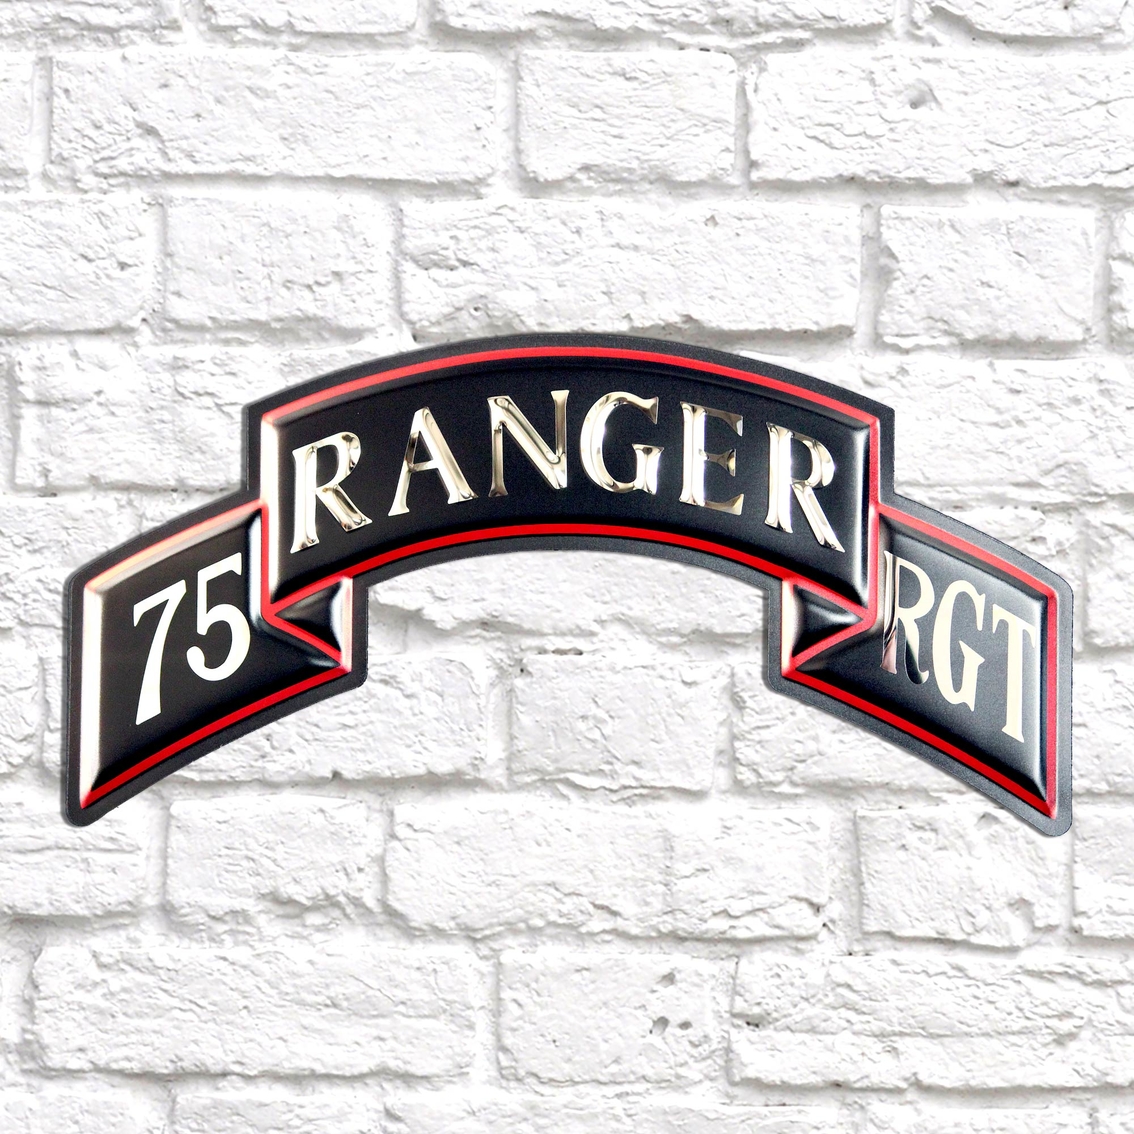 Chrome Domz Army Rangers 75th Embossed Wall Art Scroll - Image 2 of 3